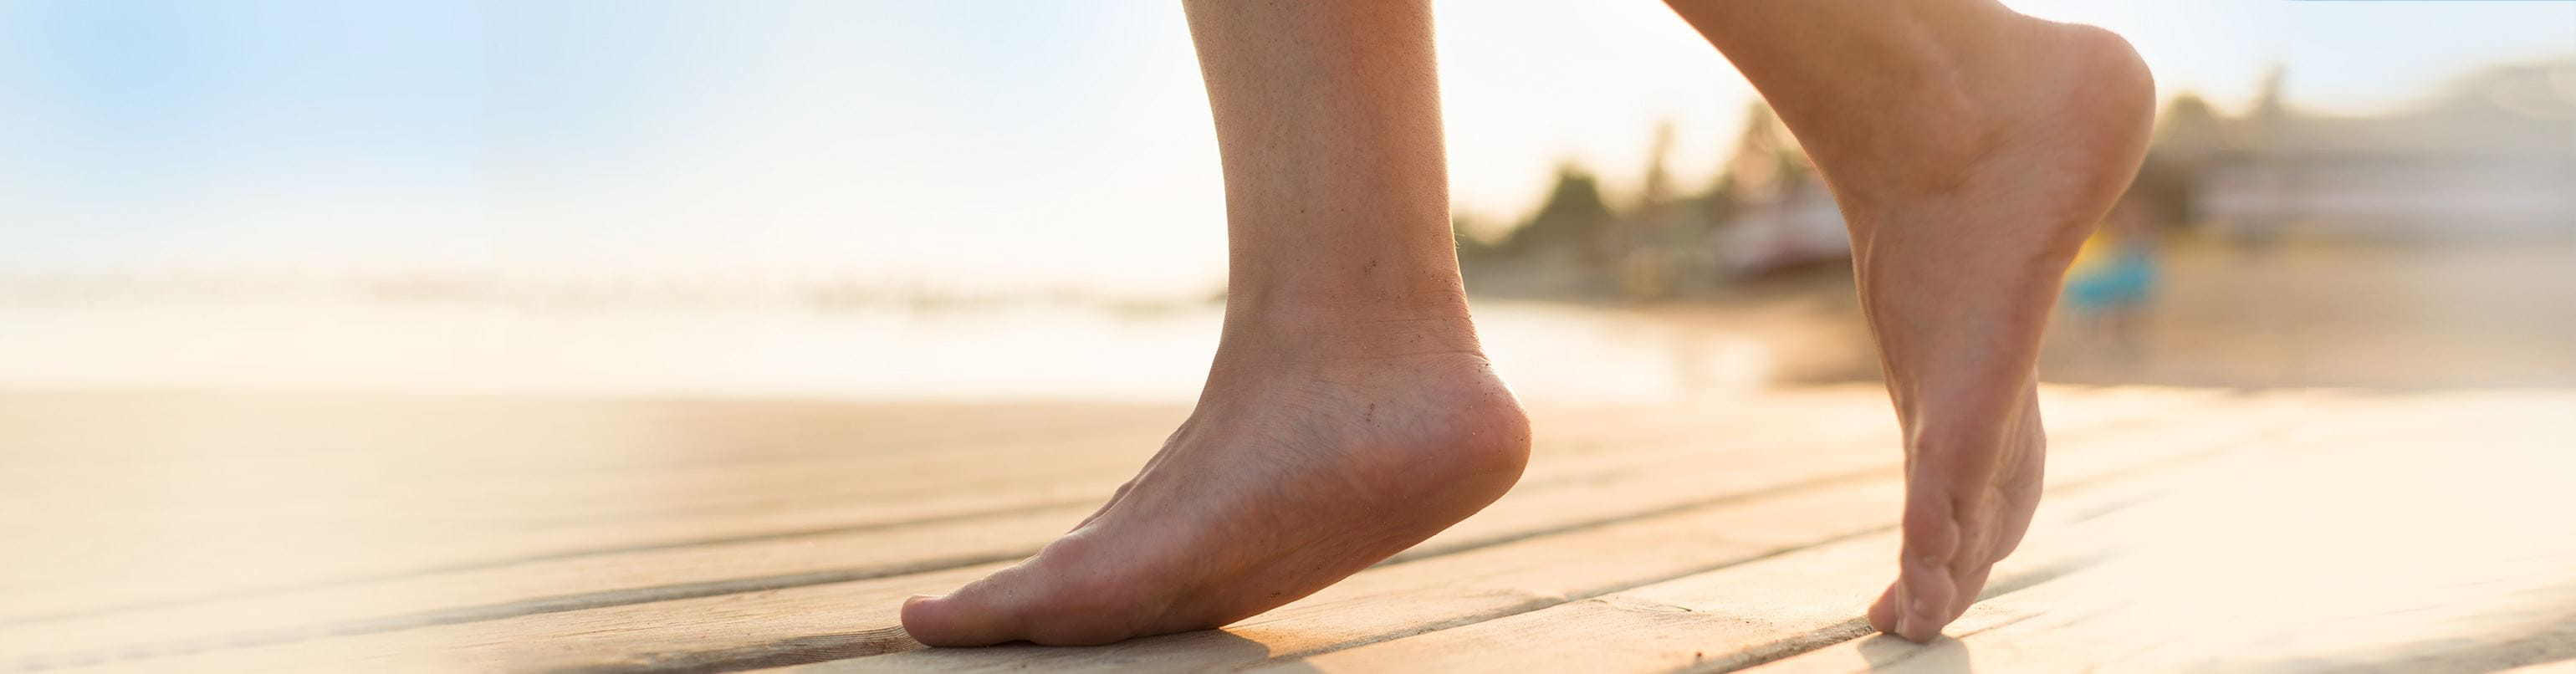 How to get rid of cracked heels fast - Quora